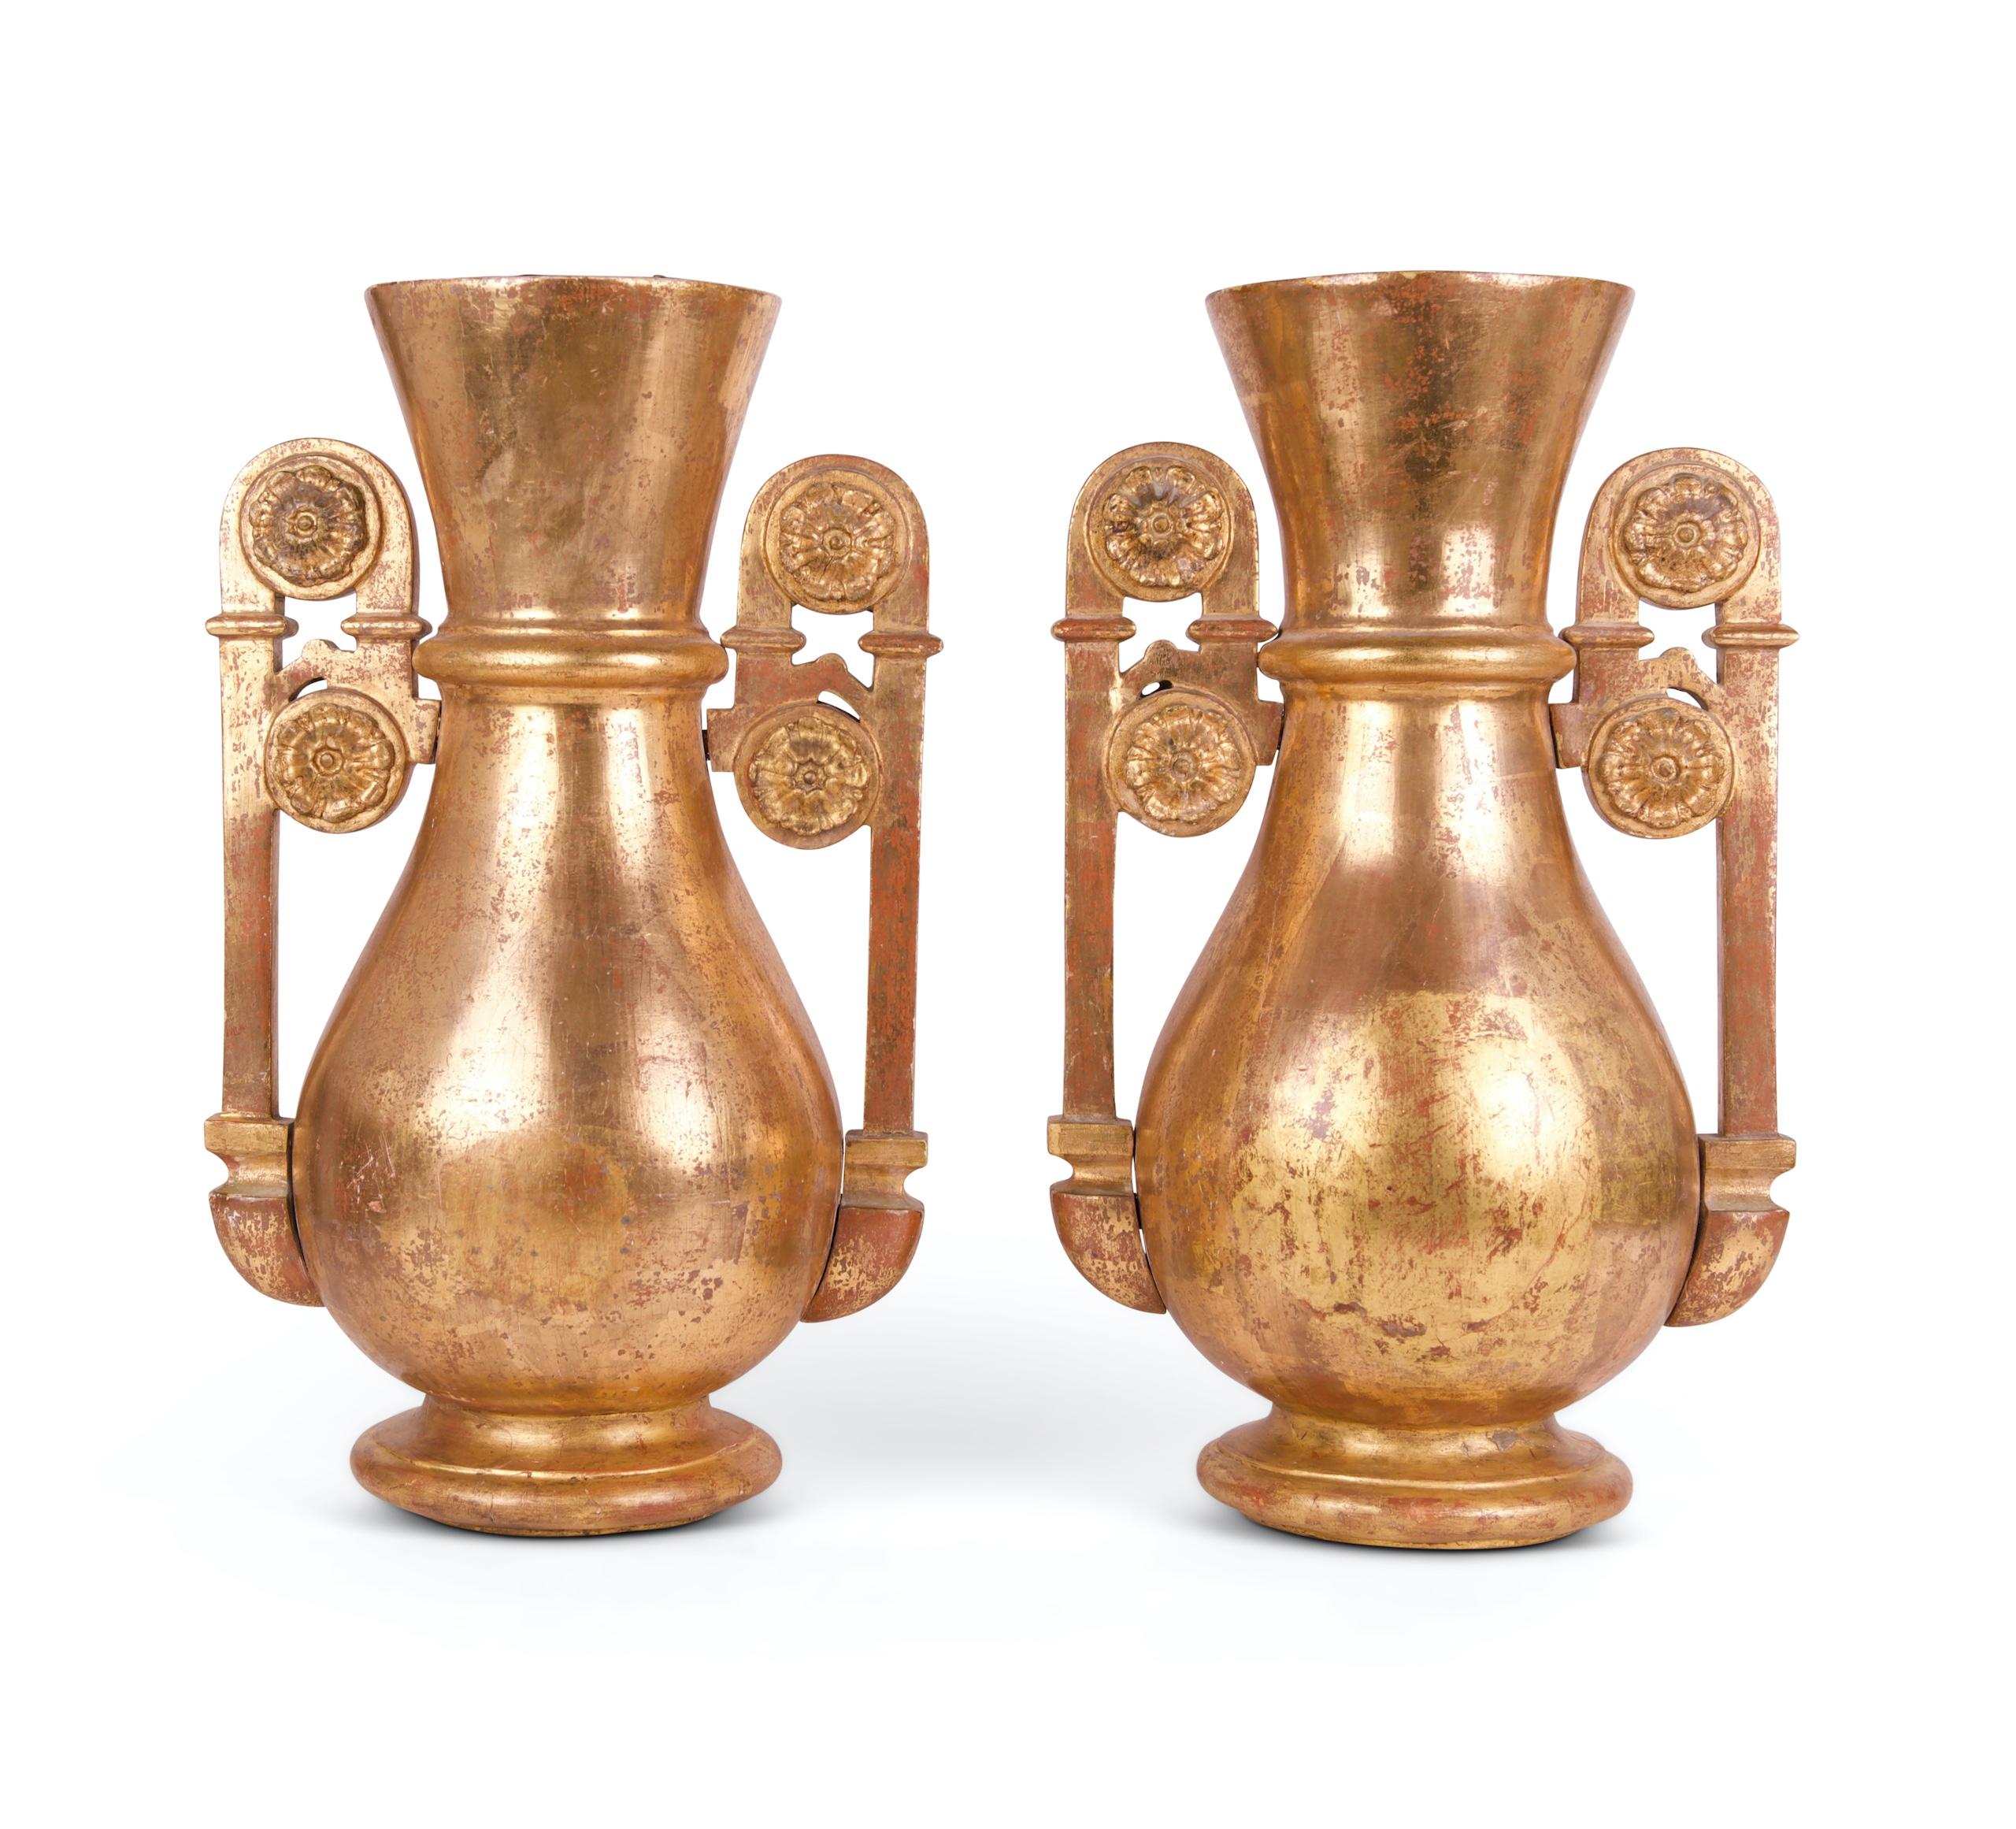 A superb pair of Baltic early 19th century giltwood neo-classical paterae mounted twin-handled vases.